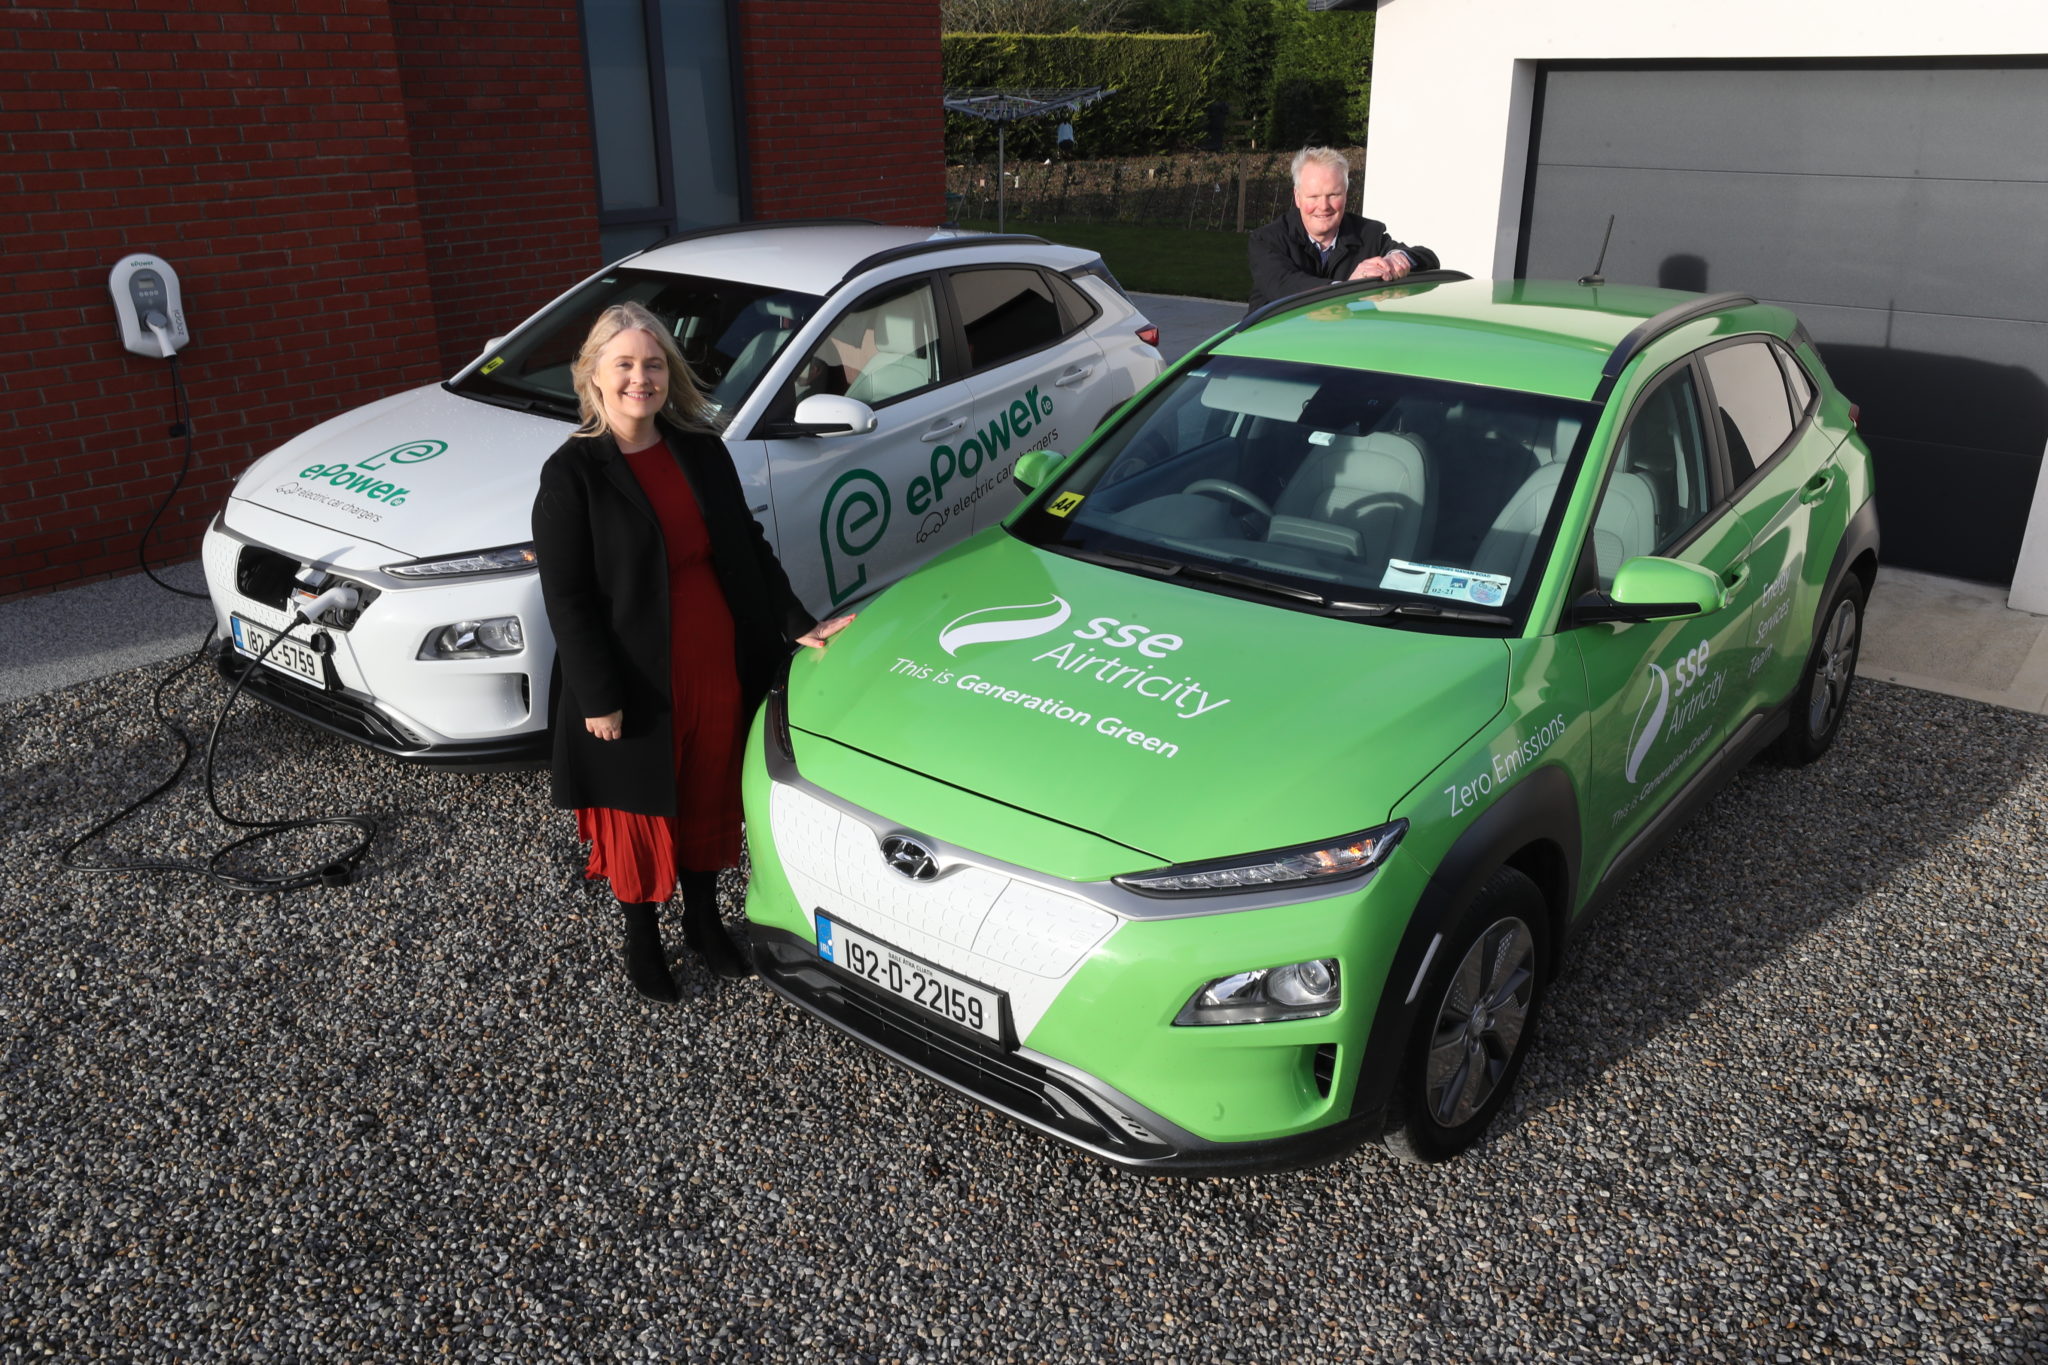 SSE Airtricity teams up with Corkbased ePower to provide customers